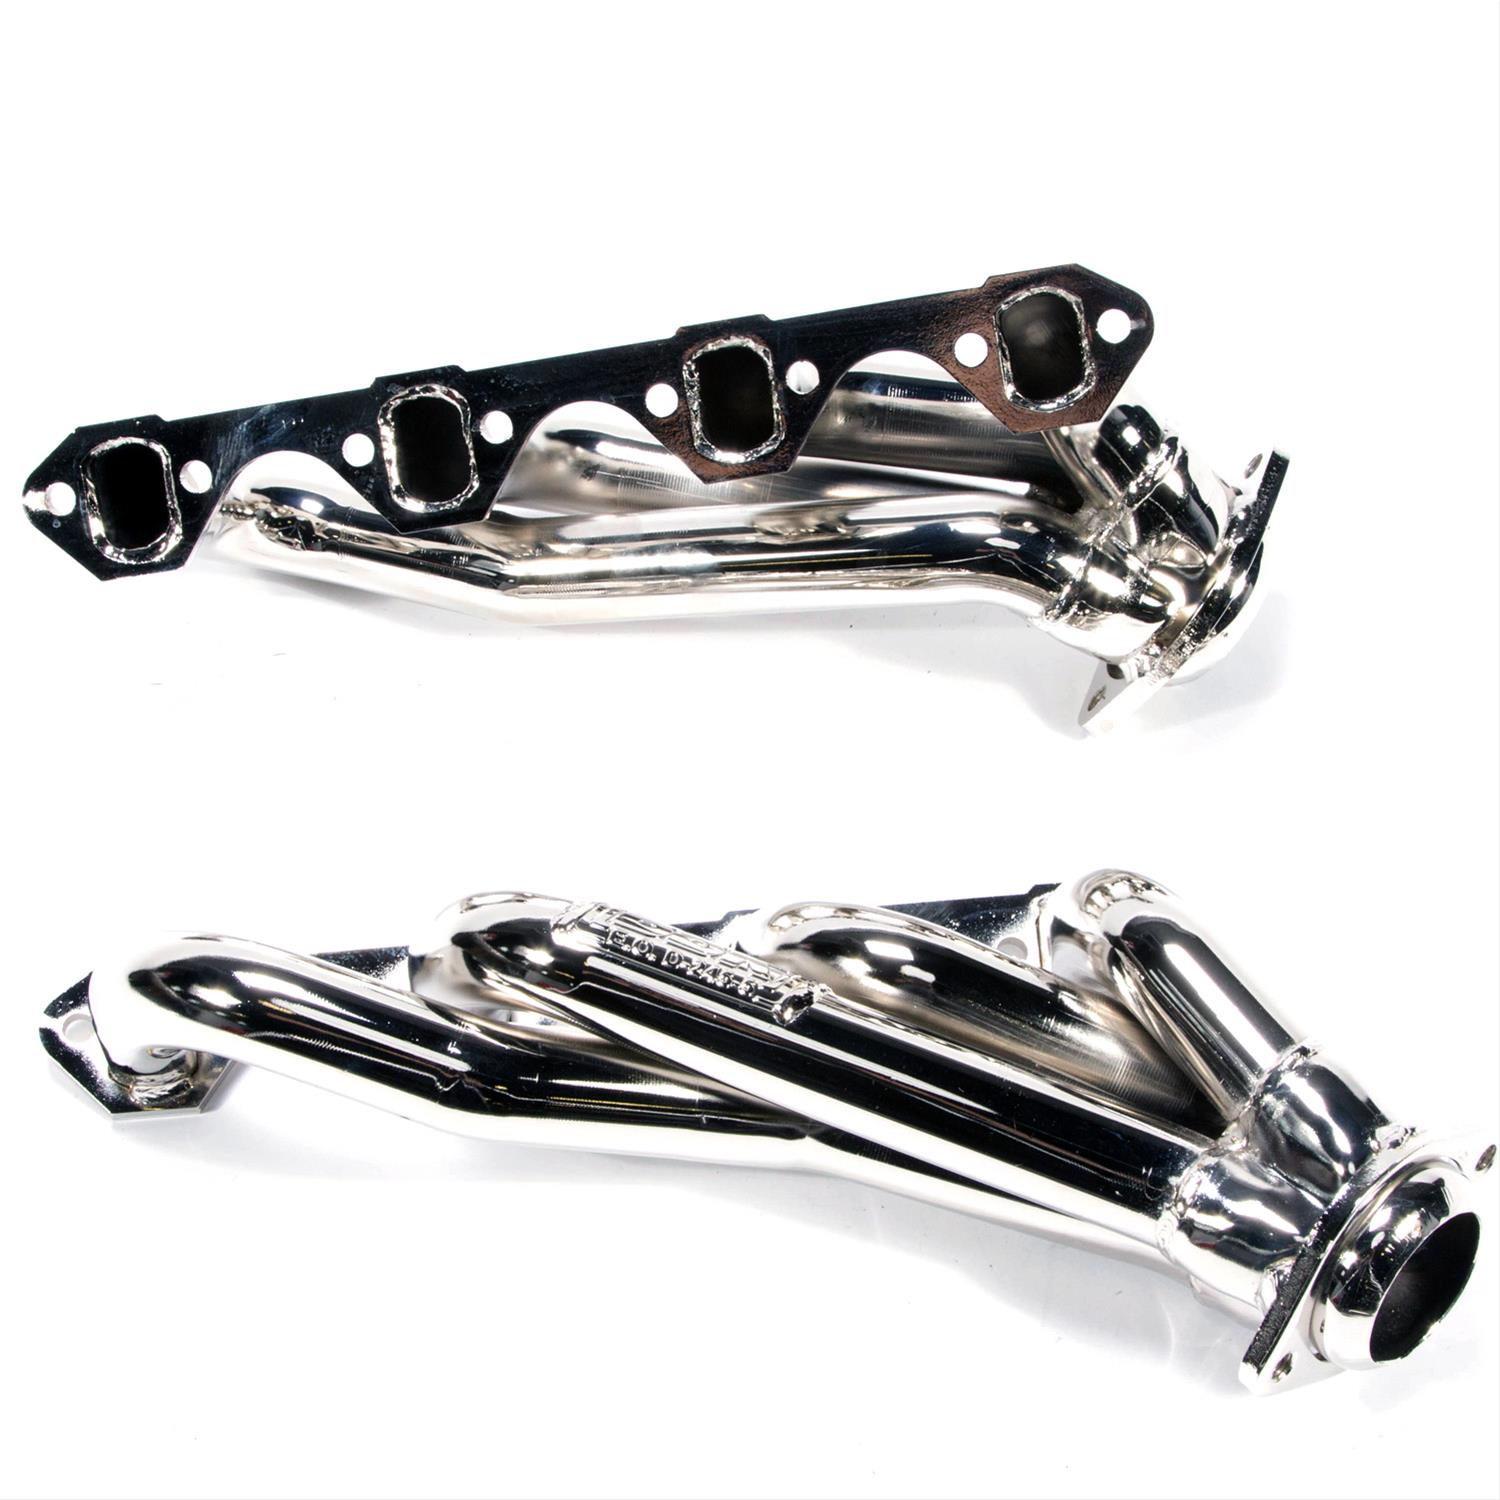 Ford racing p shorty headers #9